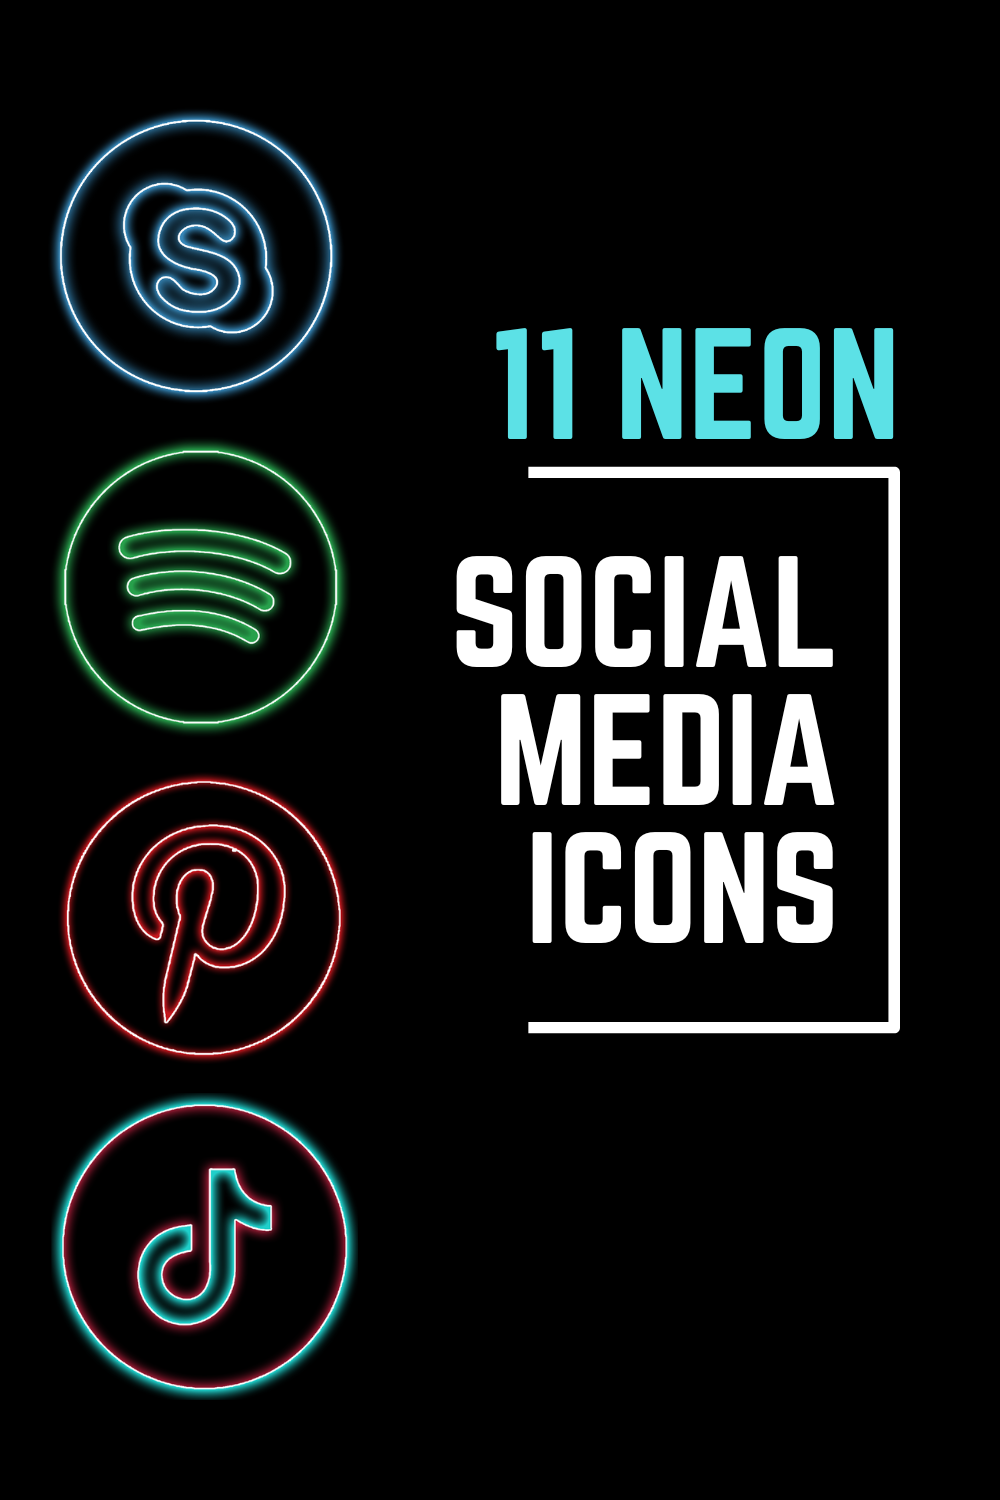 Pack of 11 Social Media Icons in Neon Effect - pinterest image preview.